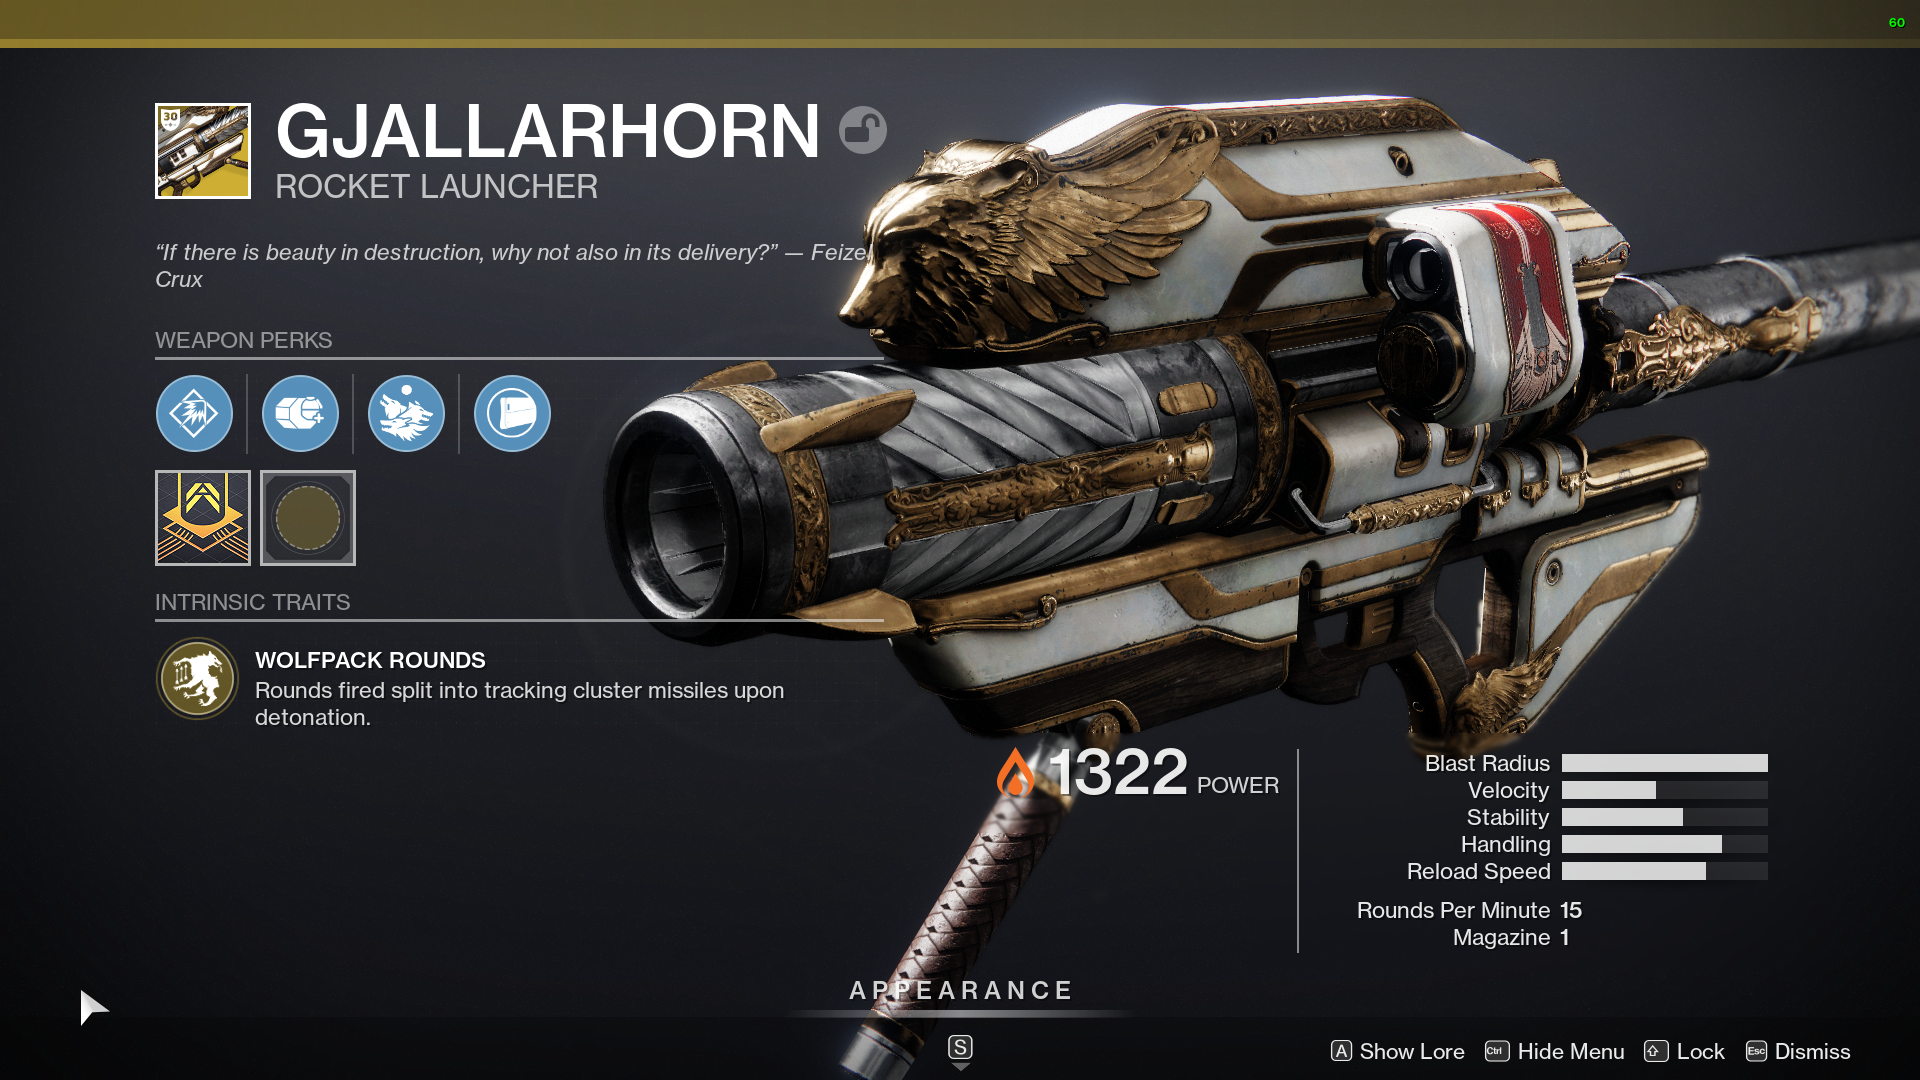 A close up of the Exotic rocket launcher, Gjallarhorn